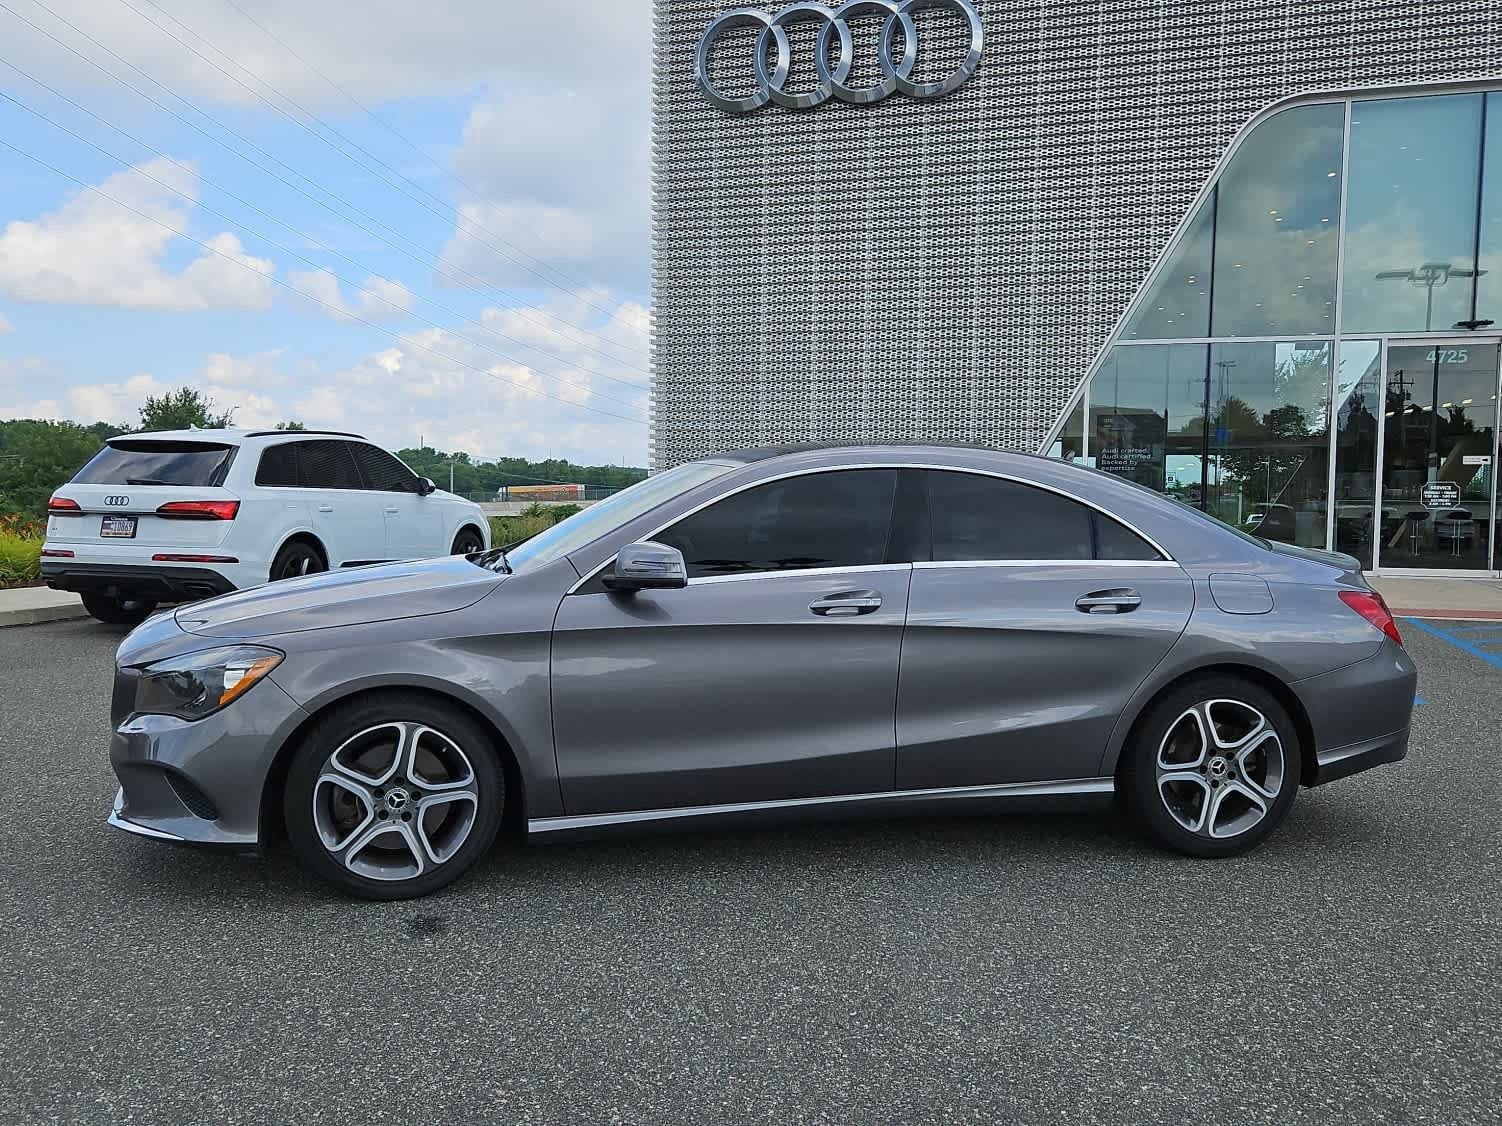 Used 2018 Mercedes-Benz CLA CLA250 with VIN WDDSJ4GB4JN537792 for sale in Allentown, PA